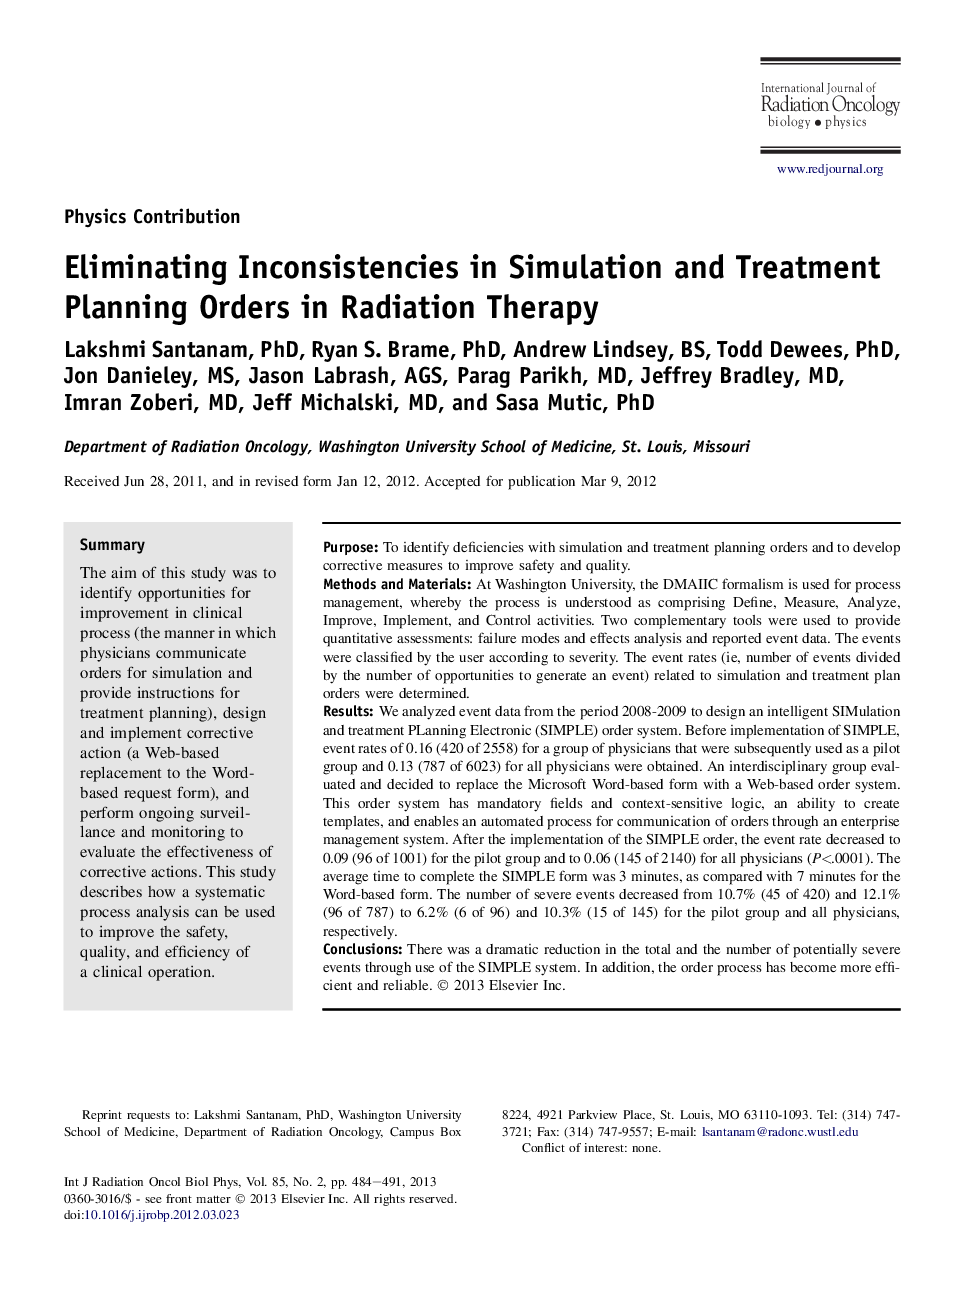 Eliminating Inconsistencies in Simulation and Treatment Planning Orders in Radiation Therapy